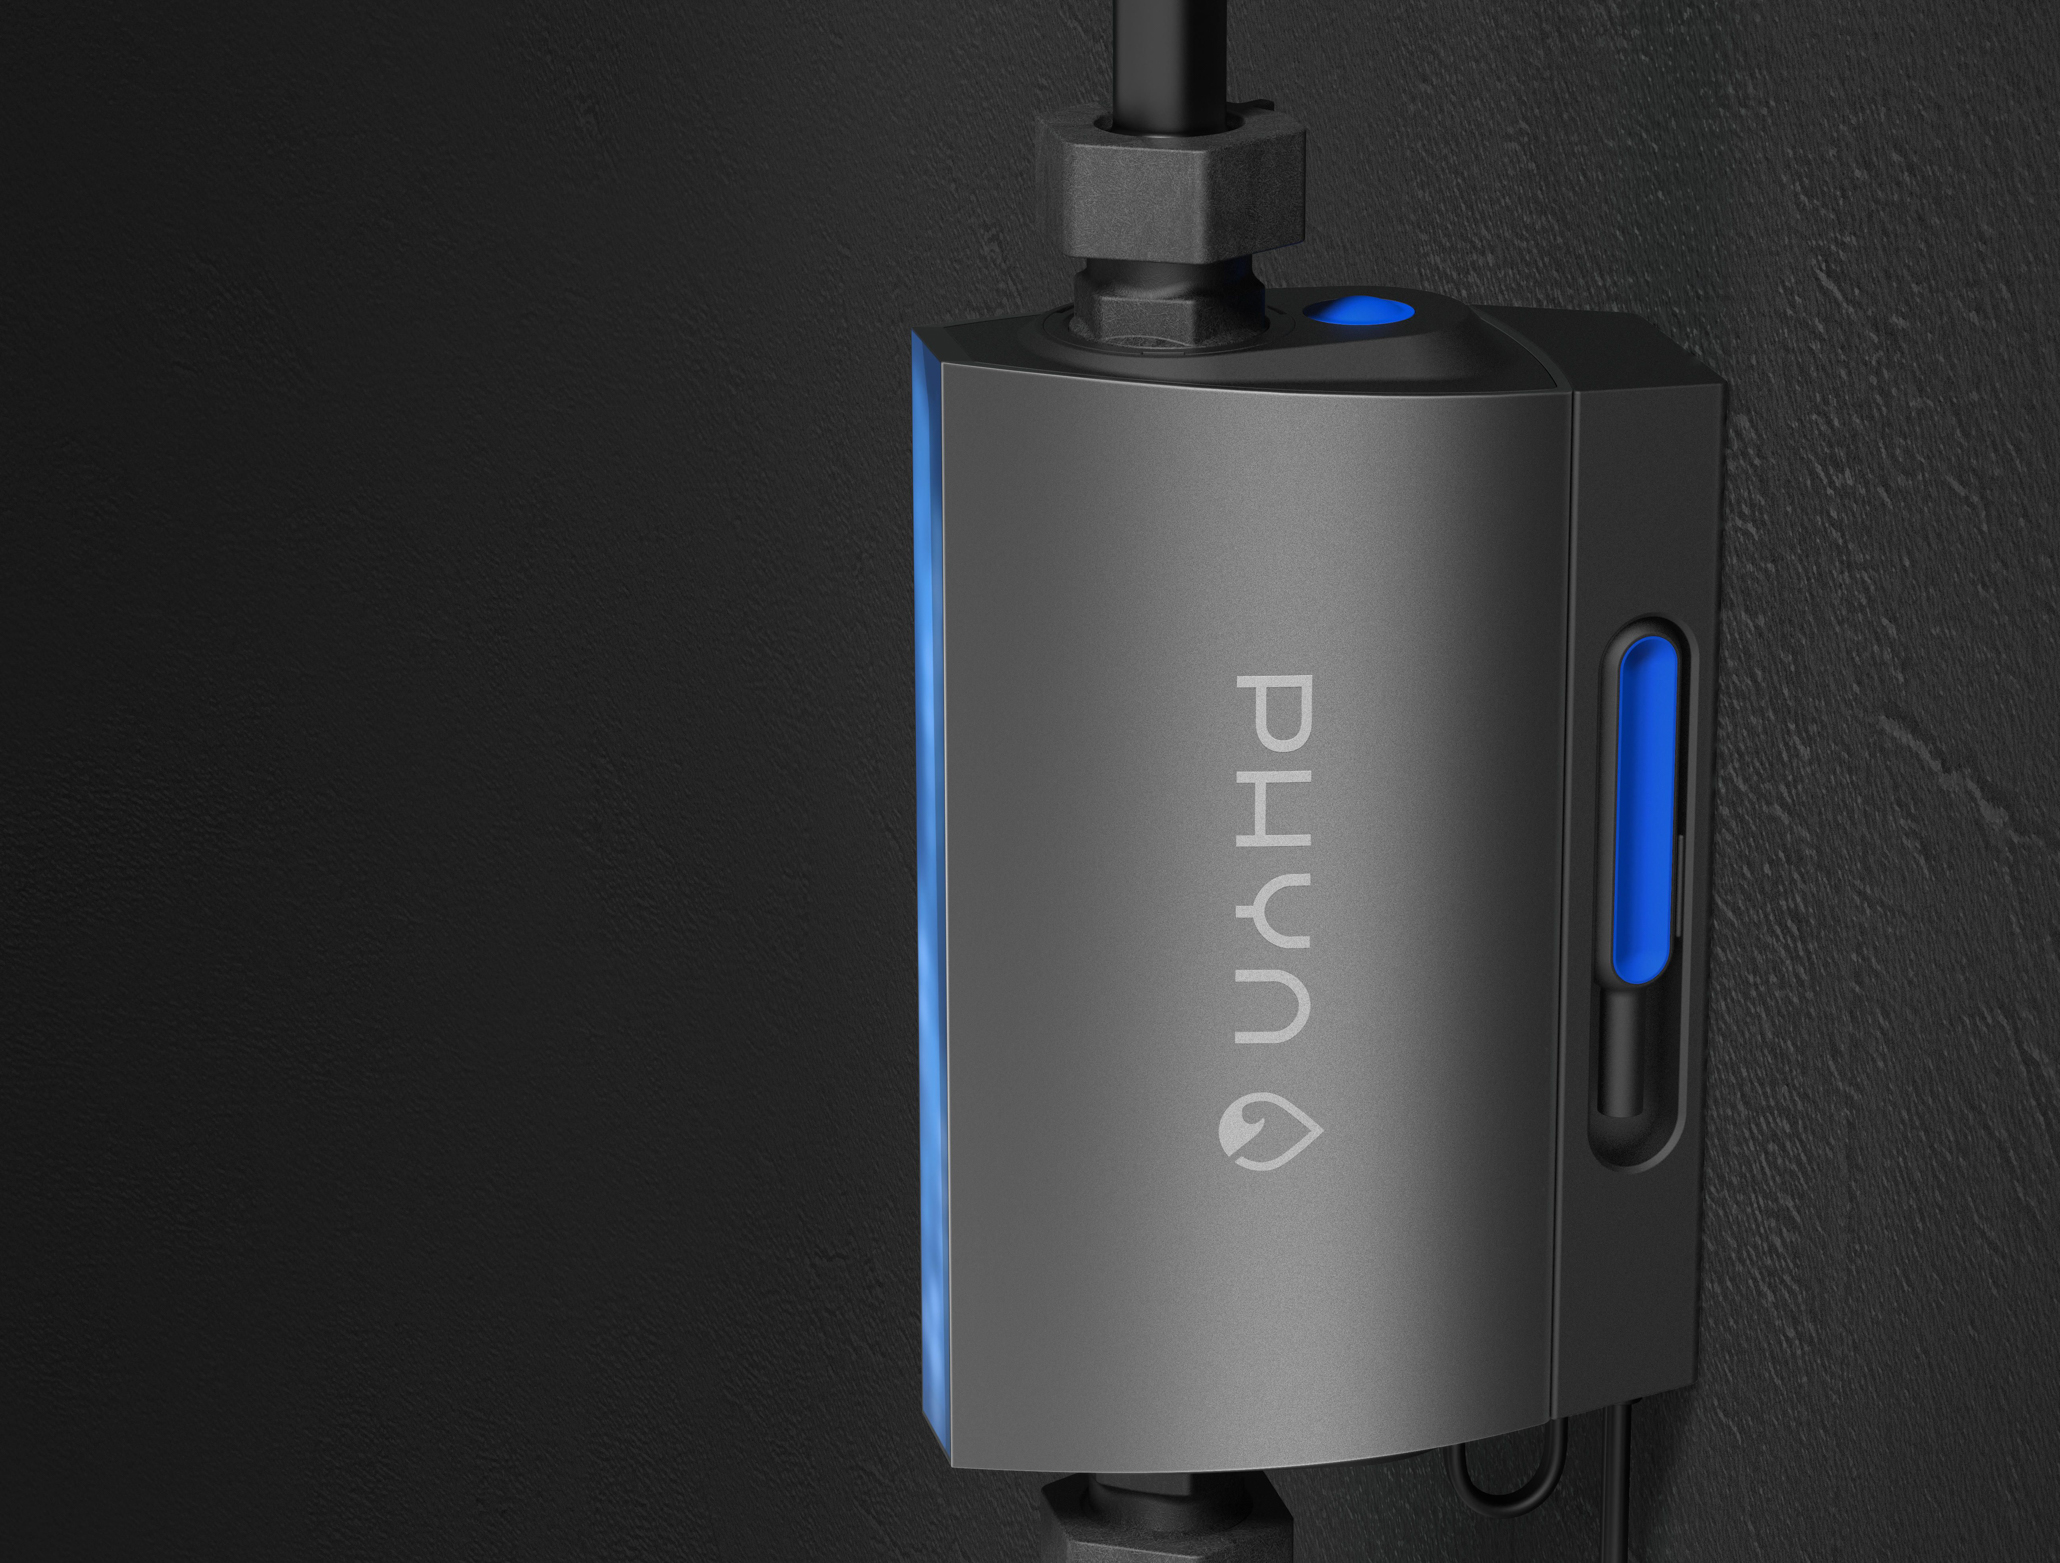 A smart water sensor from Belkin International and Uponor, Phyn Plus is a sophisticated water monitor designed to immediately alert the homeowner and automatically shut off the home water supply in the event of a leak. Image: Pyhn.